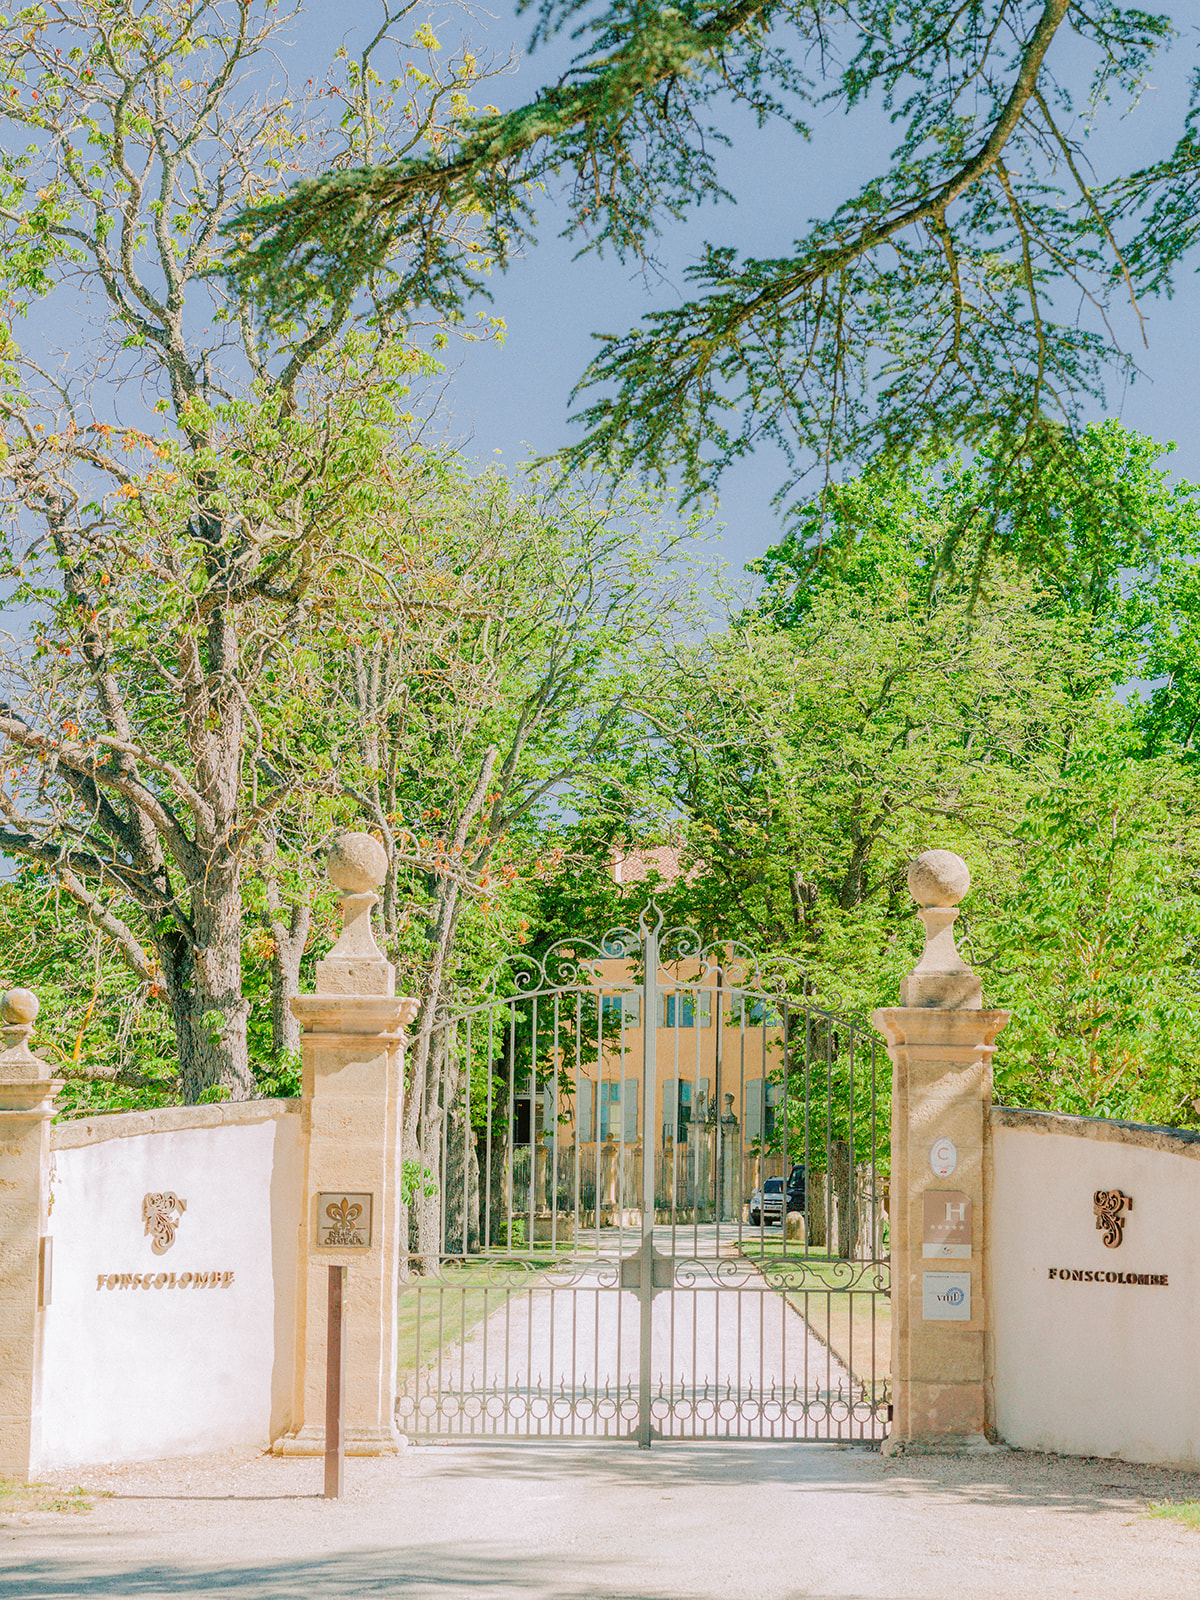 The entrance to the chateau de fonscolombe